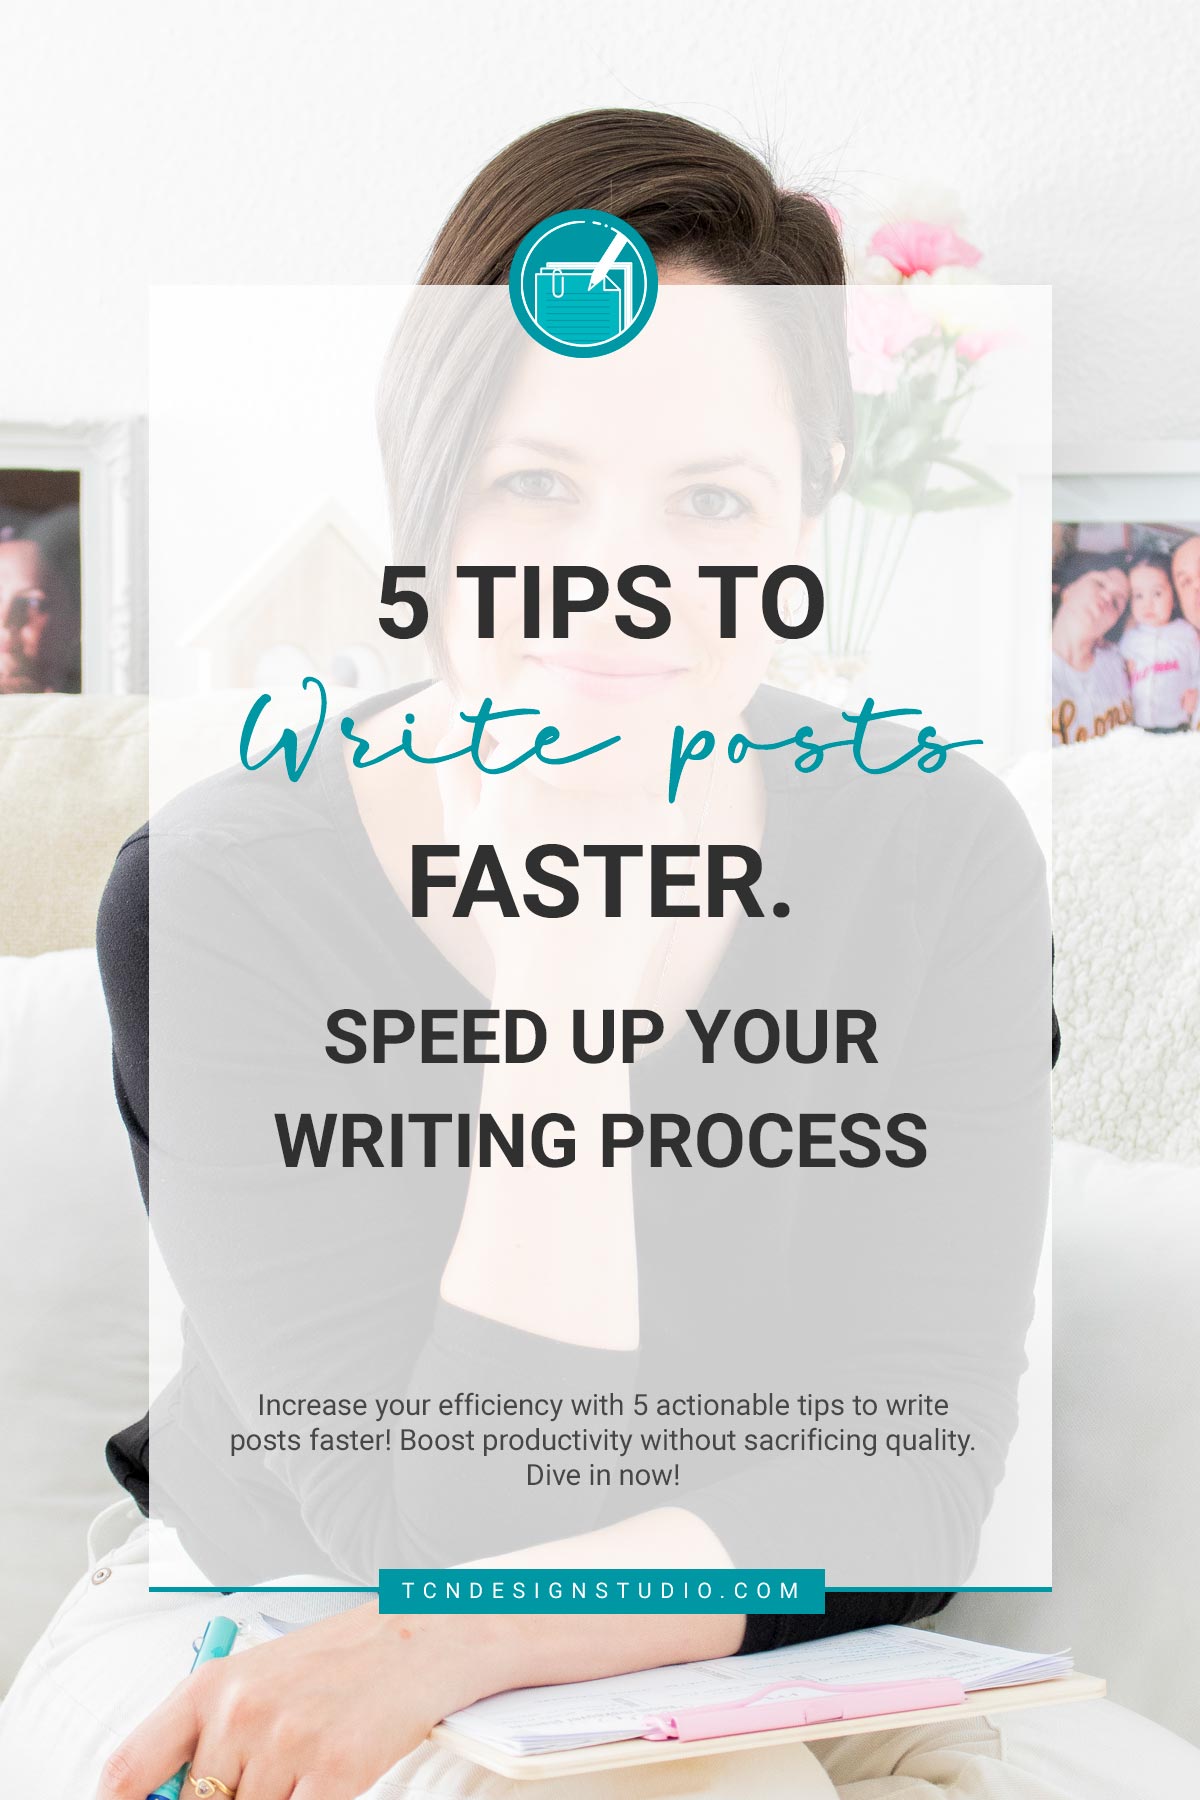 5 Tips to Write Posts Faster. Speed Up Your Writing Process. Image for pinterest with photo and title overlay